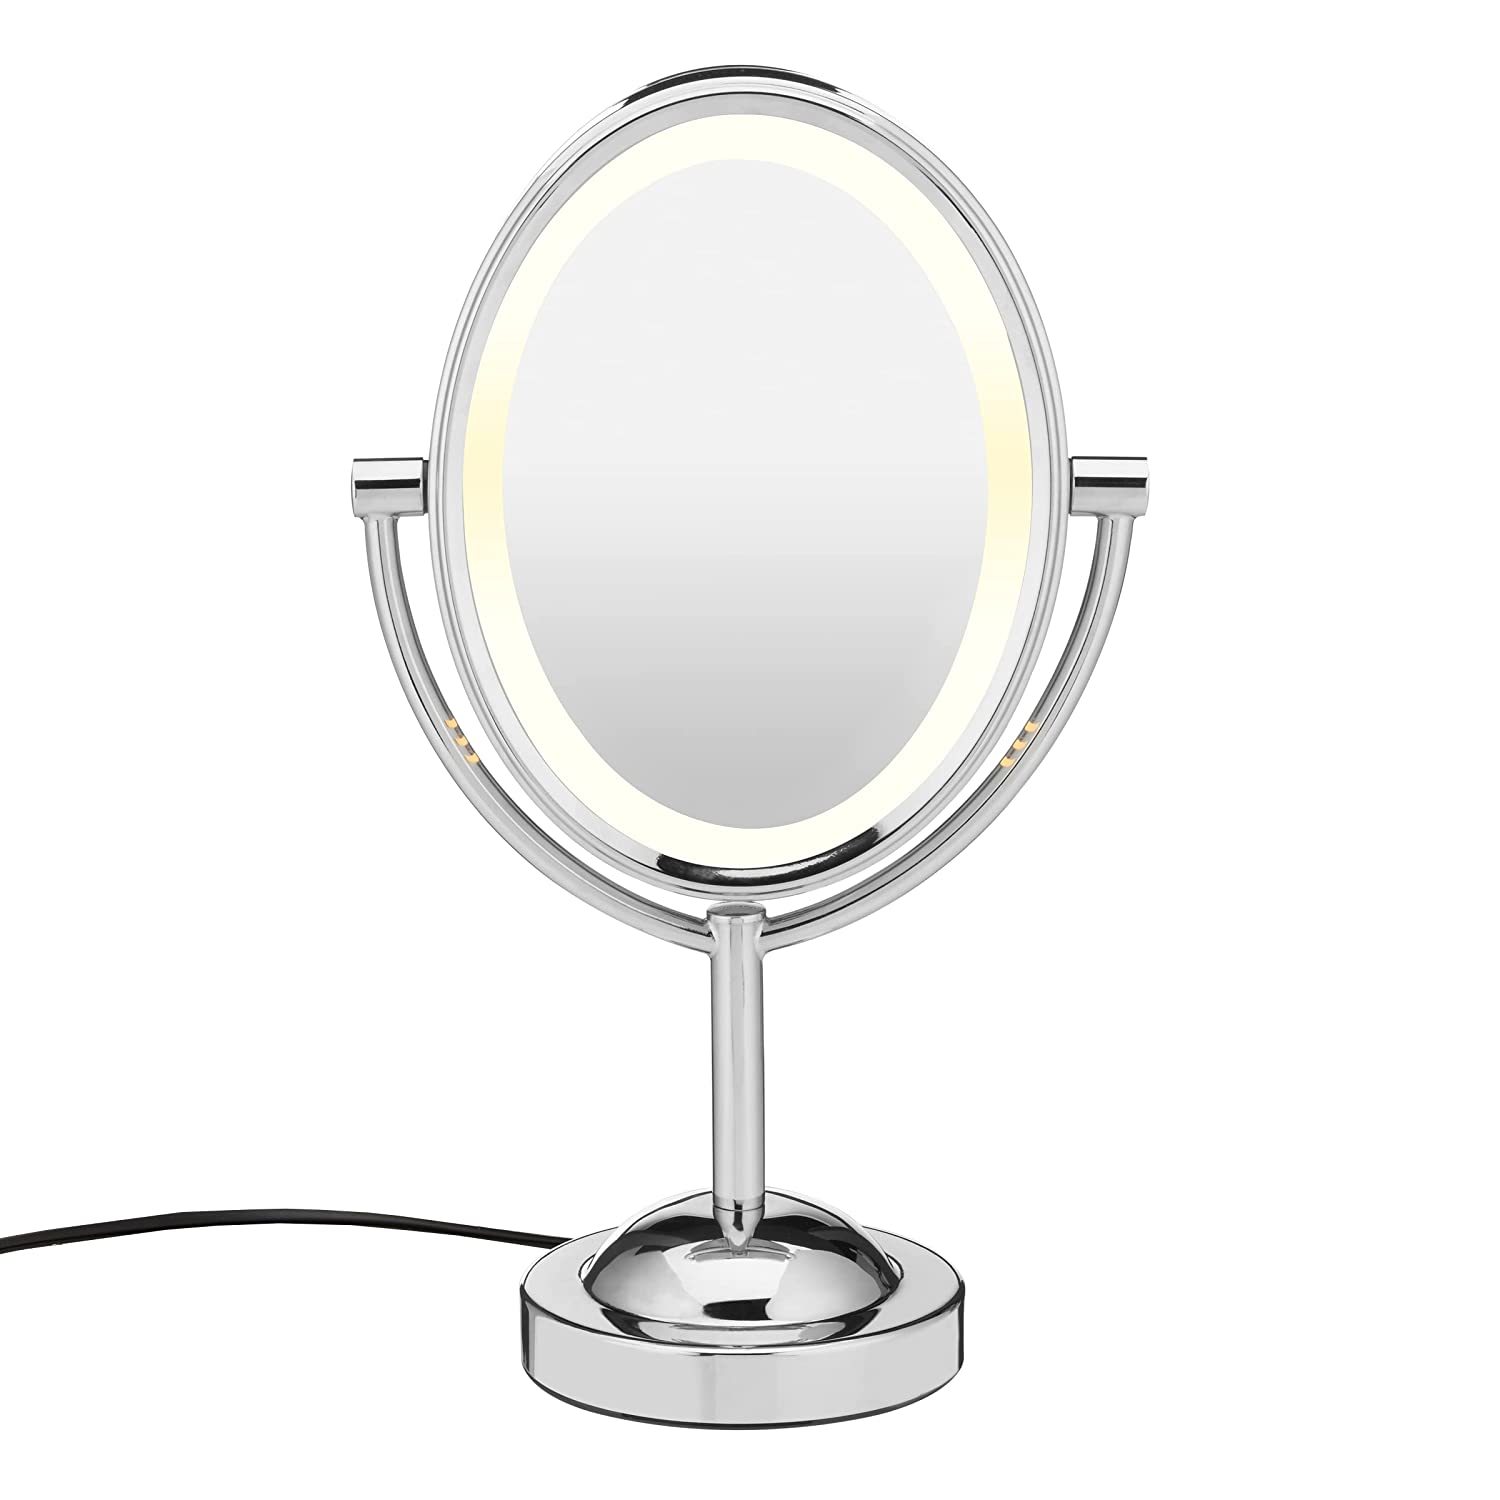 Primary image for Conair Lighted Makeup Mirror, Double-Sided Lighted Vanity Makeup, Chrome